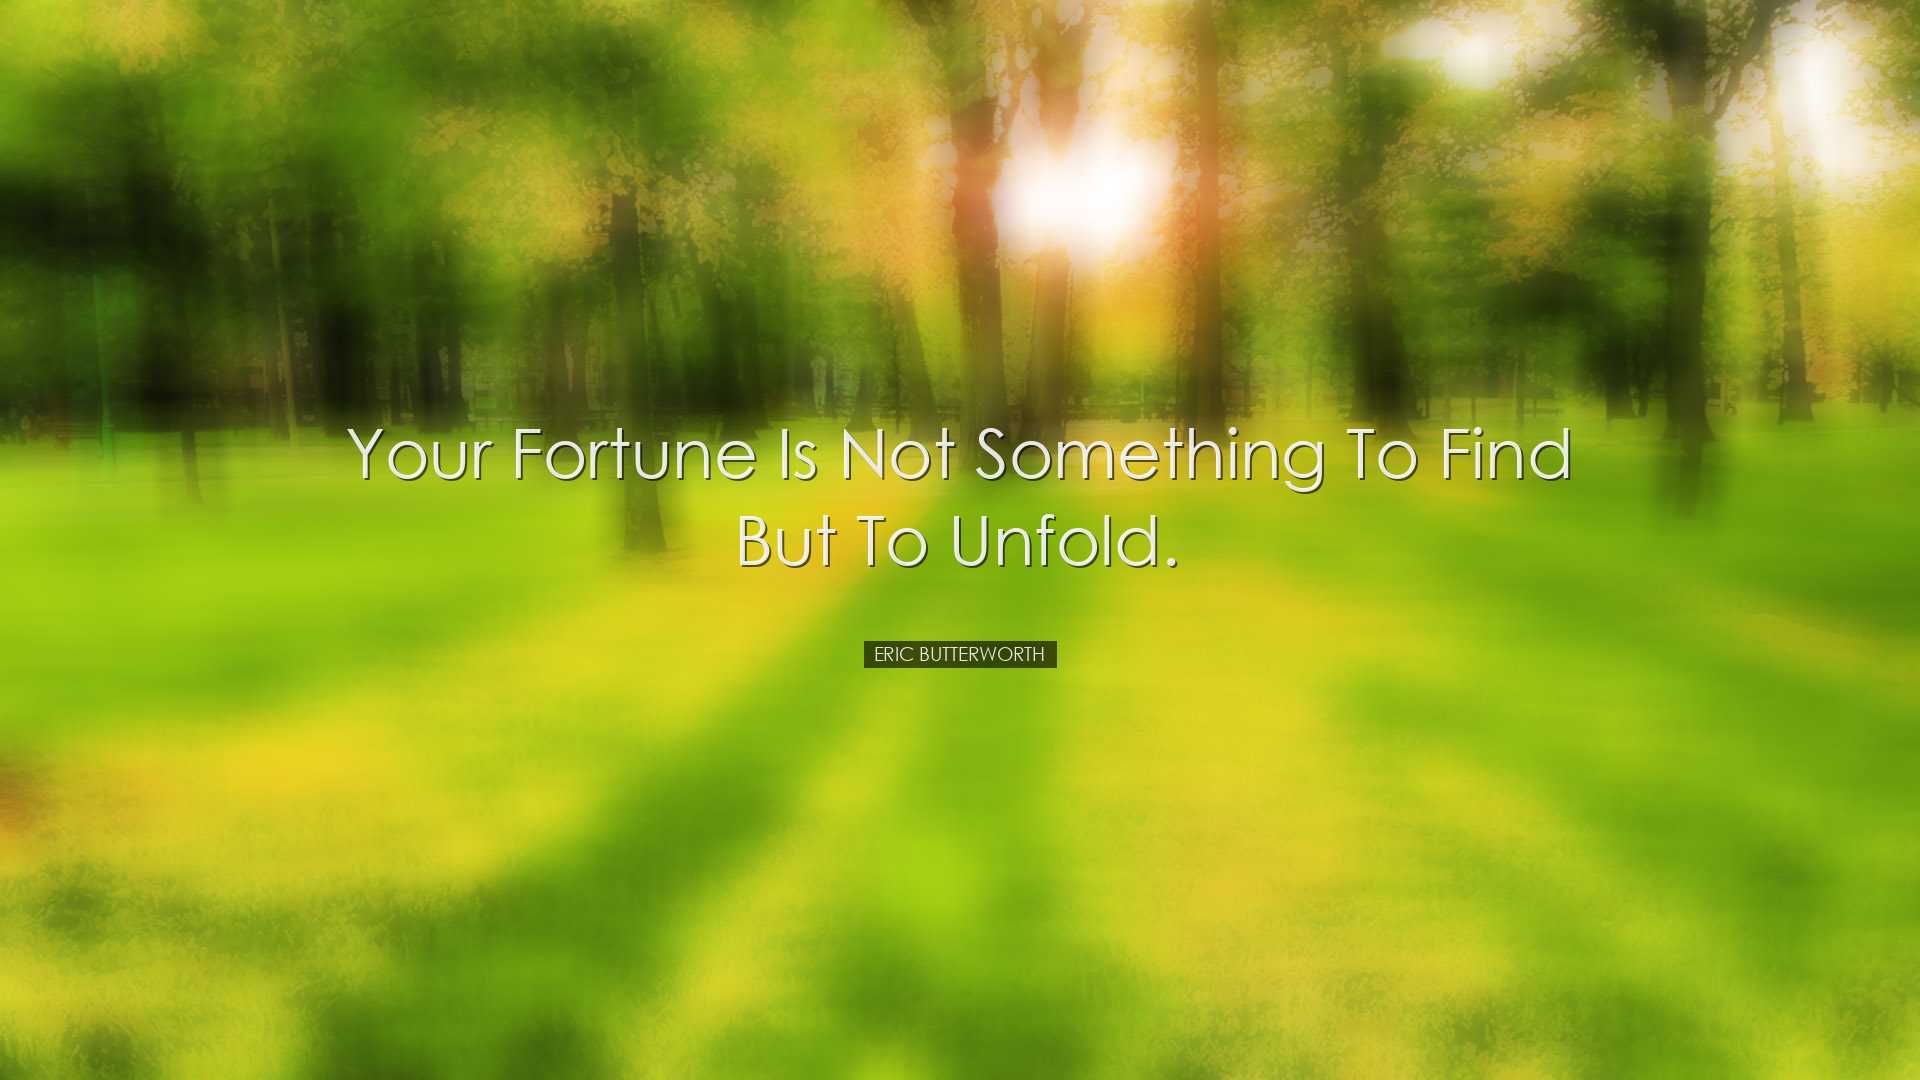 Your fortune is not something to find but to unfold. - Eric Butter